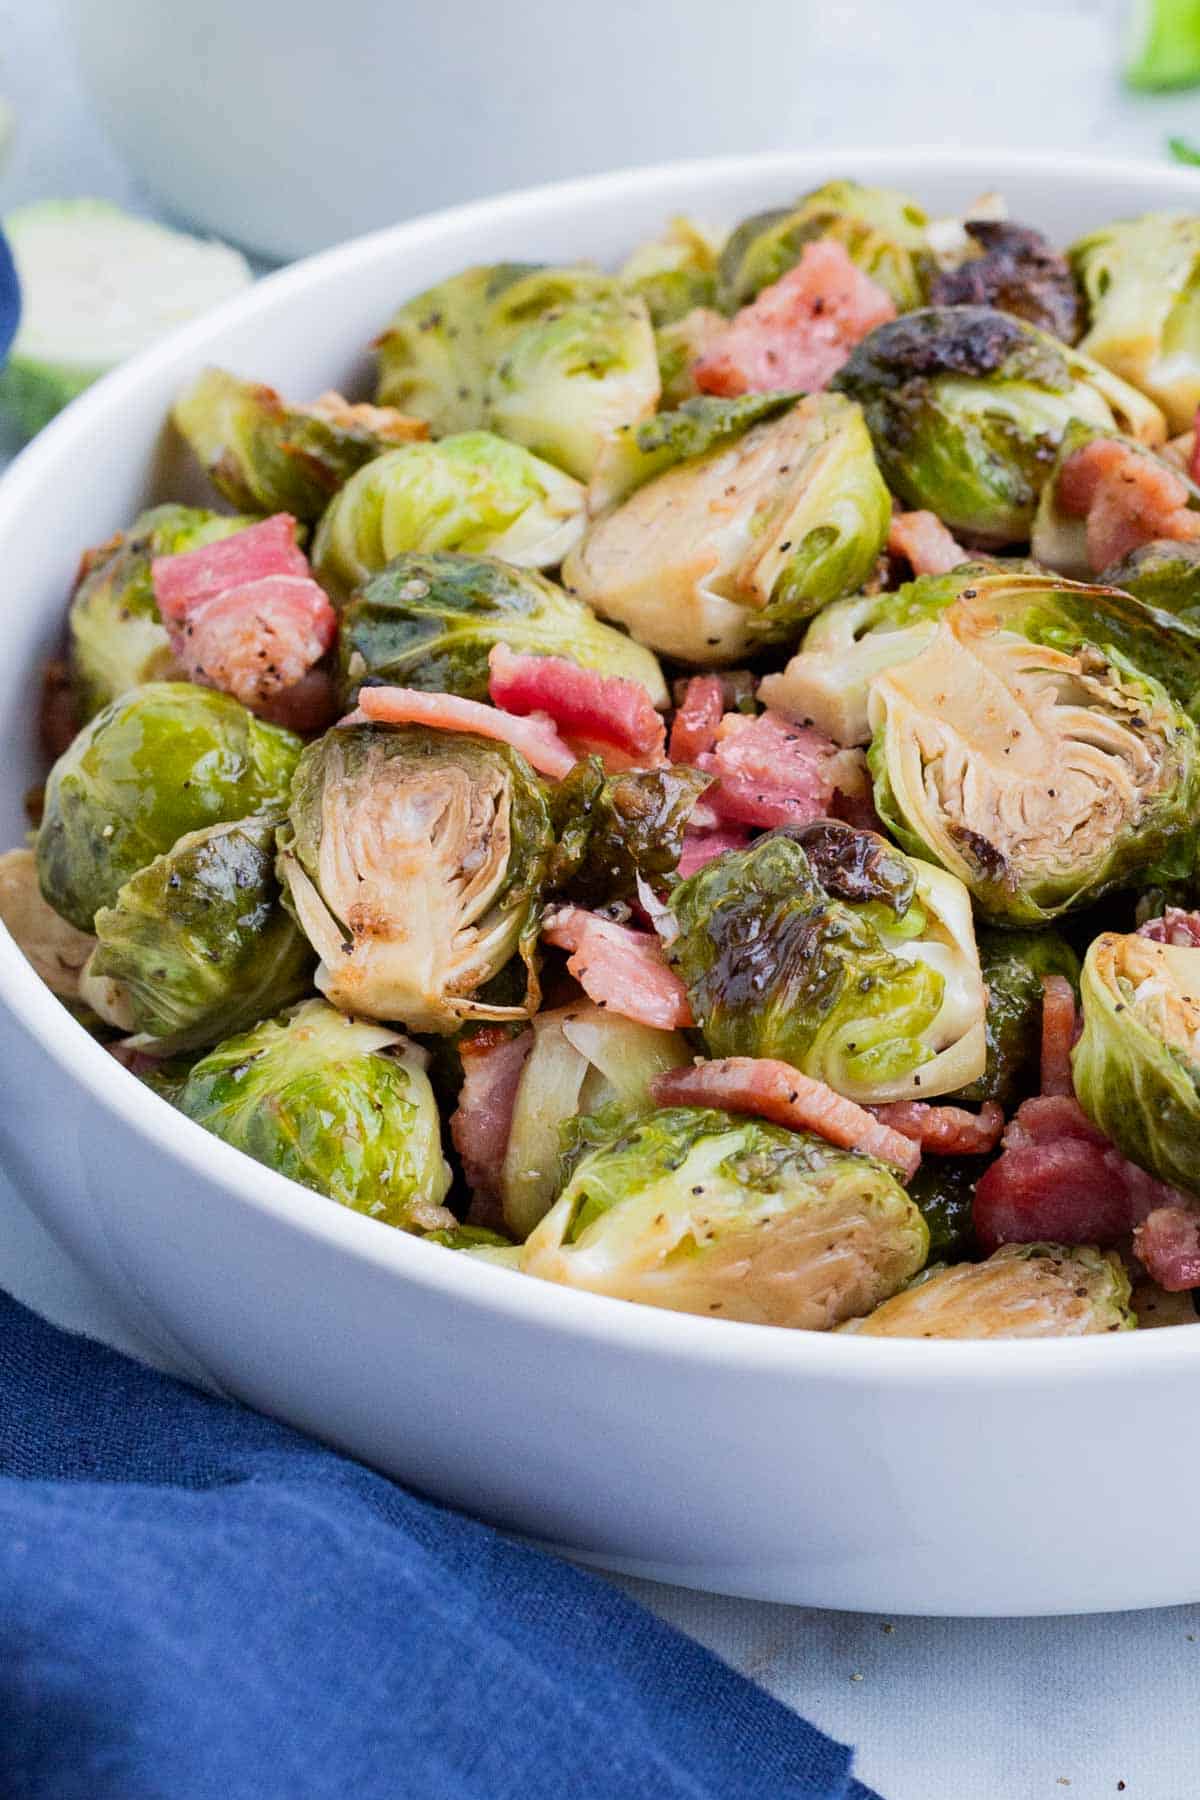 Crispy Brussels sprouts are cooked with bacon in the oven for an easy side.